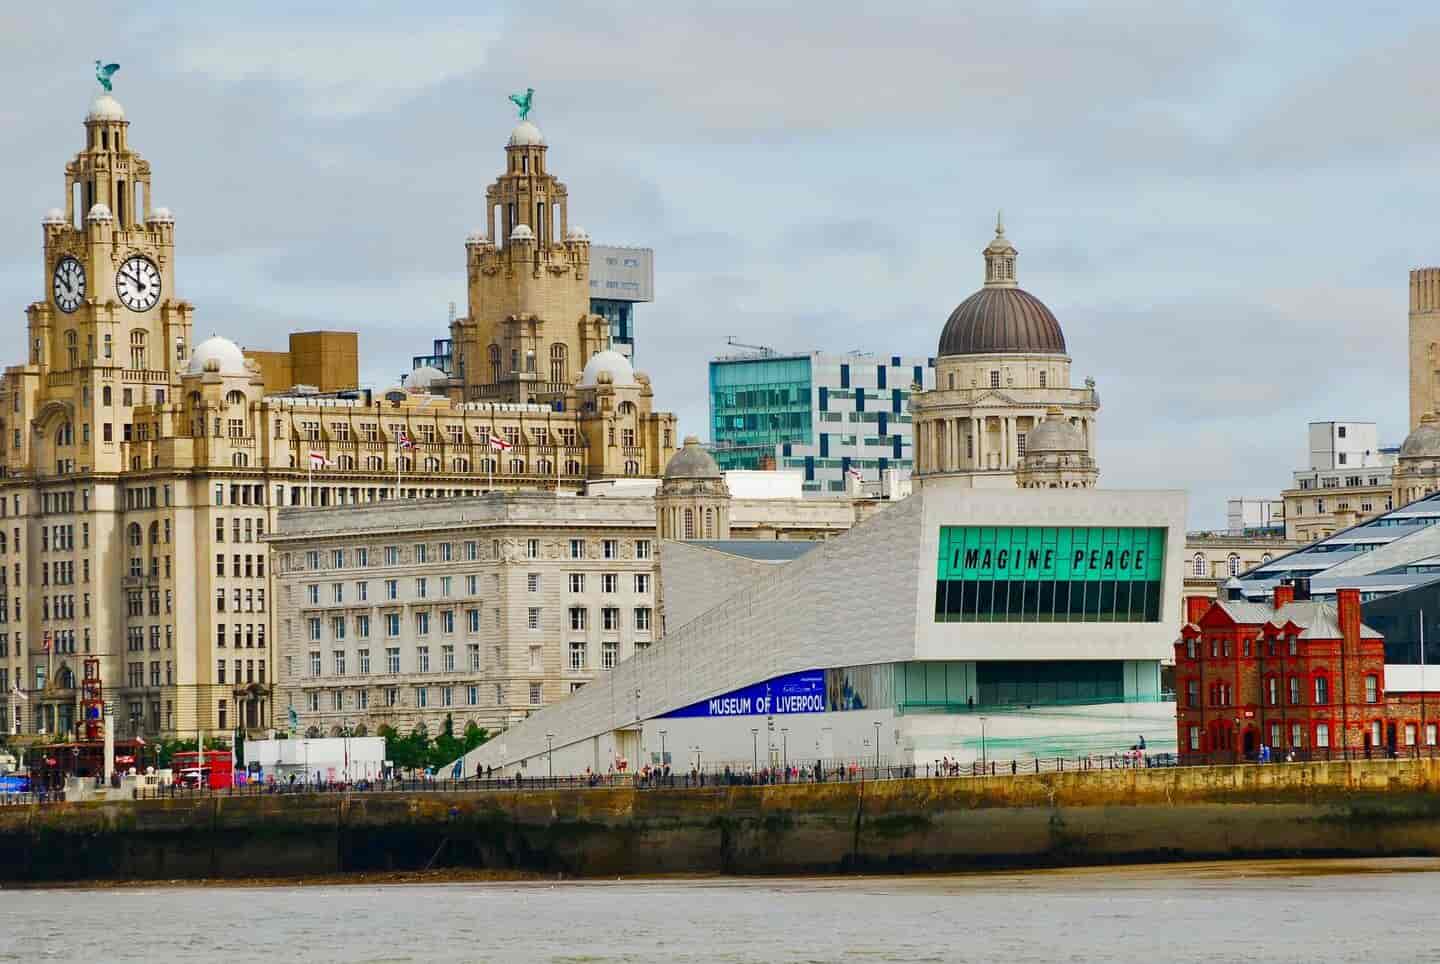 Student Accommodation in Liverpool - The Museum of Liverpool from across the River Mersey